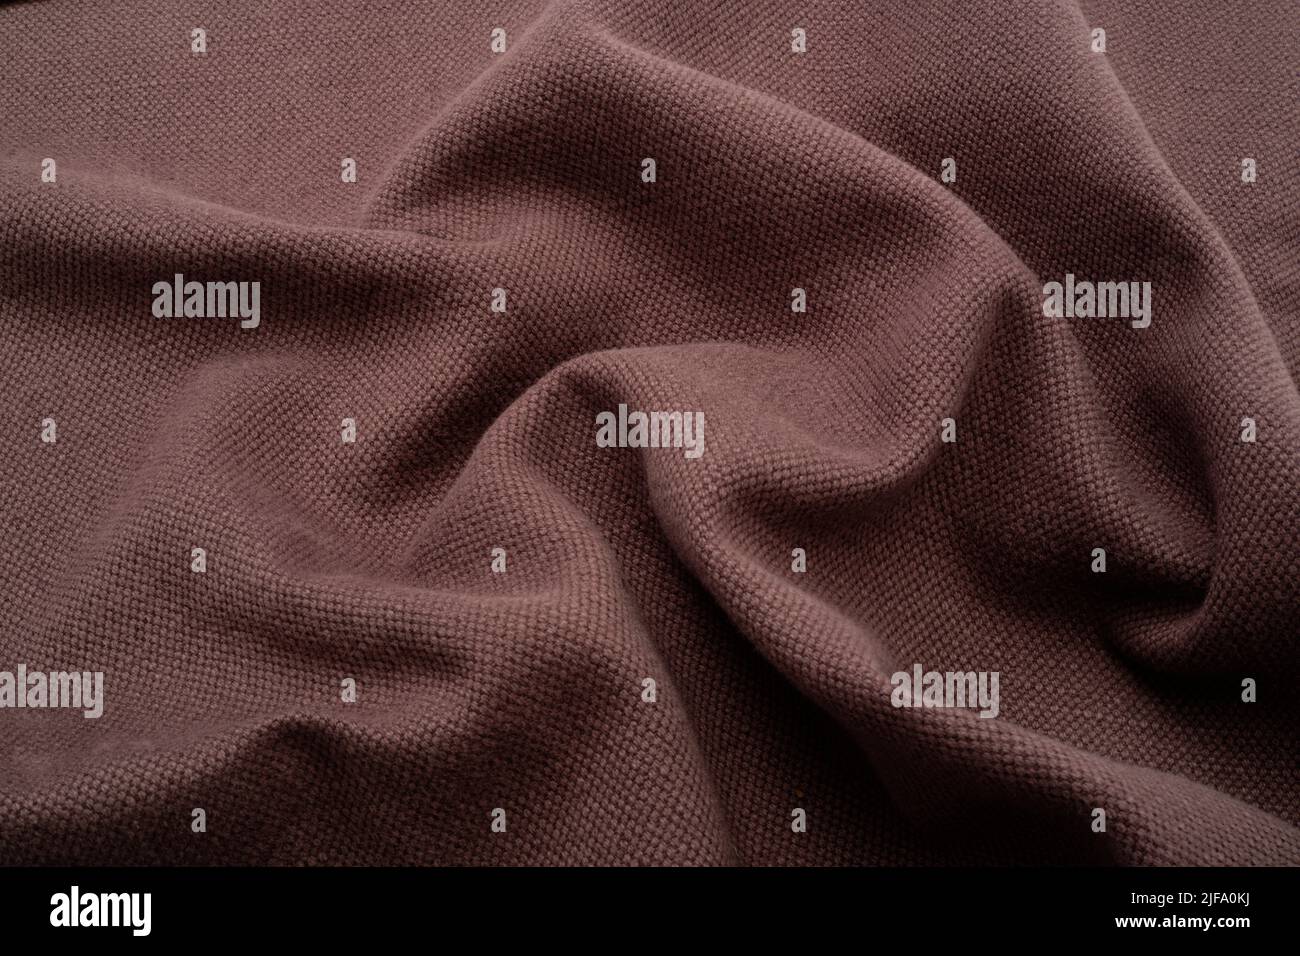 Textured fabric background. A puce or aubergine coloured fabric ruched up to add wavyness. Stock Photo